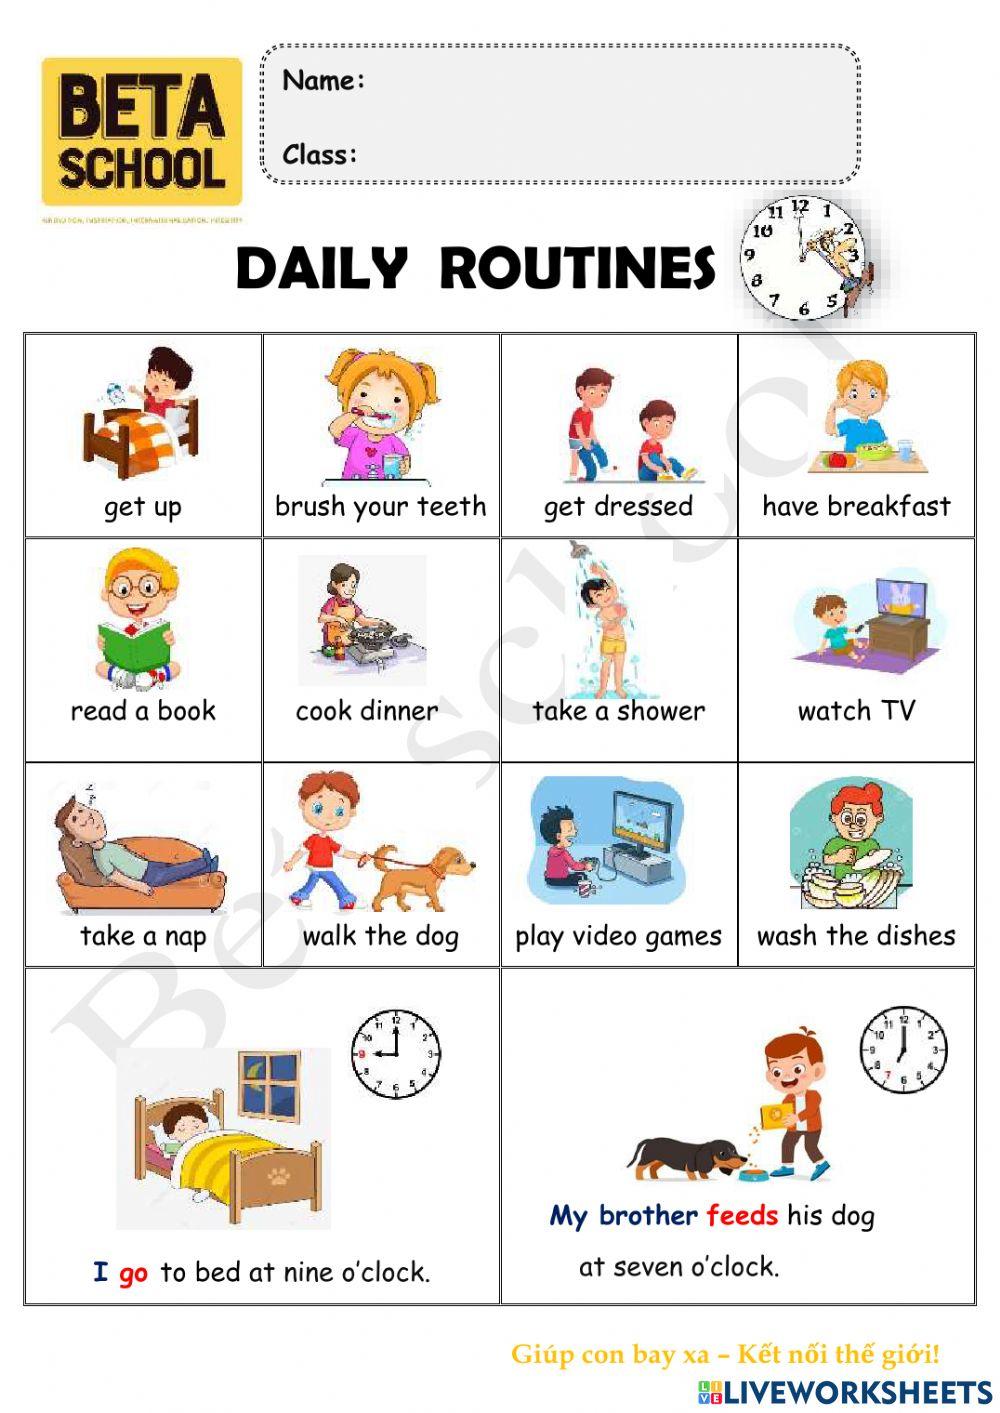 BE3A - Daily routines-TOPIC 4